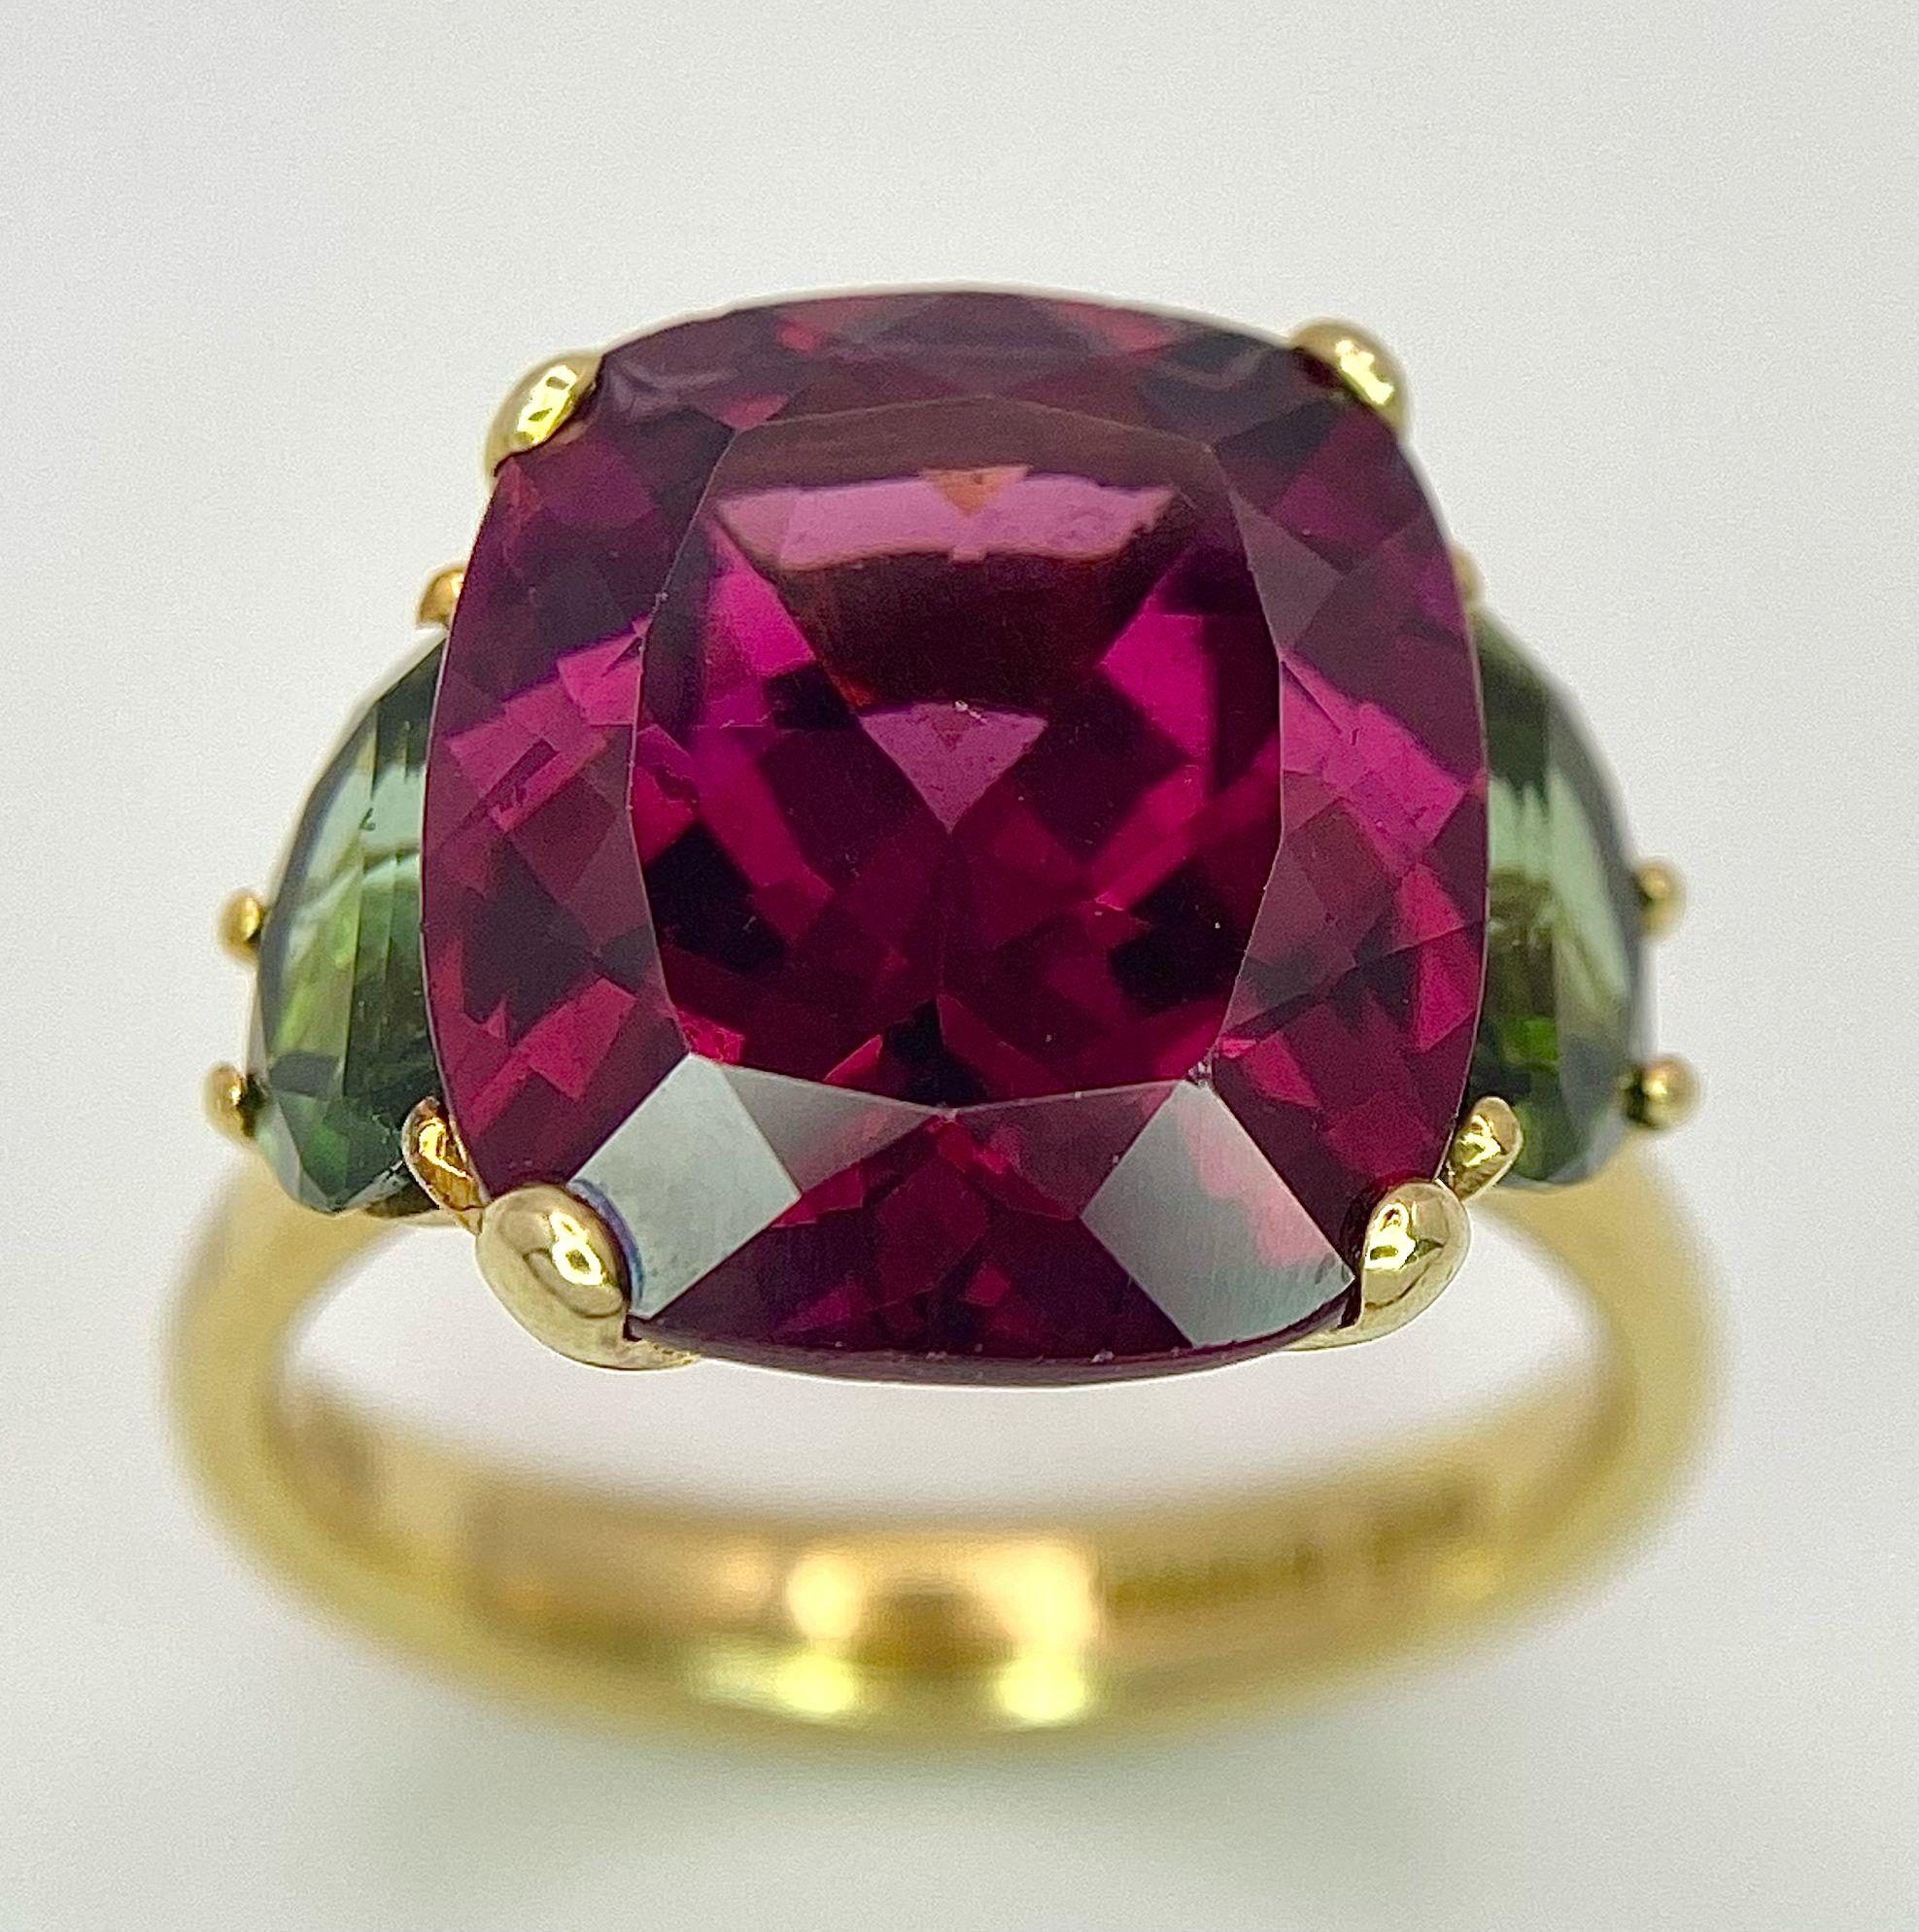 An 18K Yellow Gold, Alexandrite and Peridot Ring. A rich 5ct central alexandrite with peridot